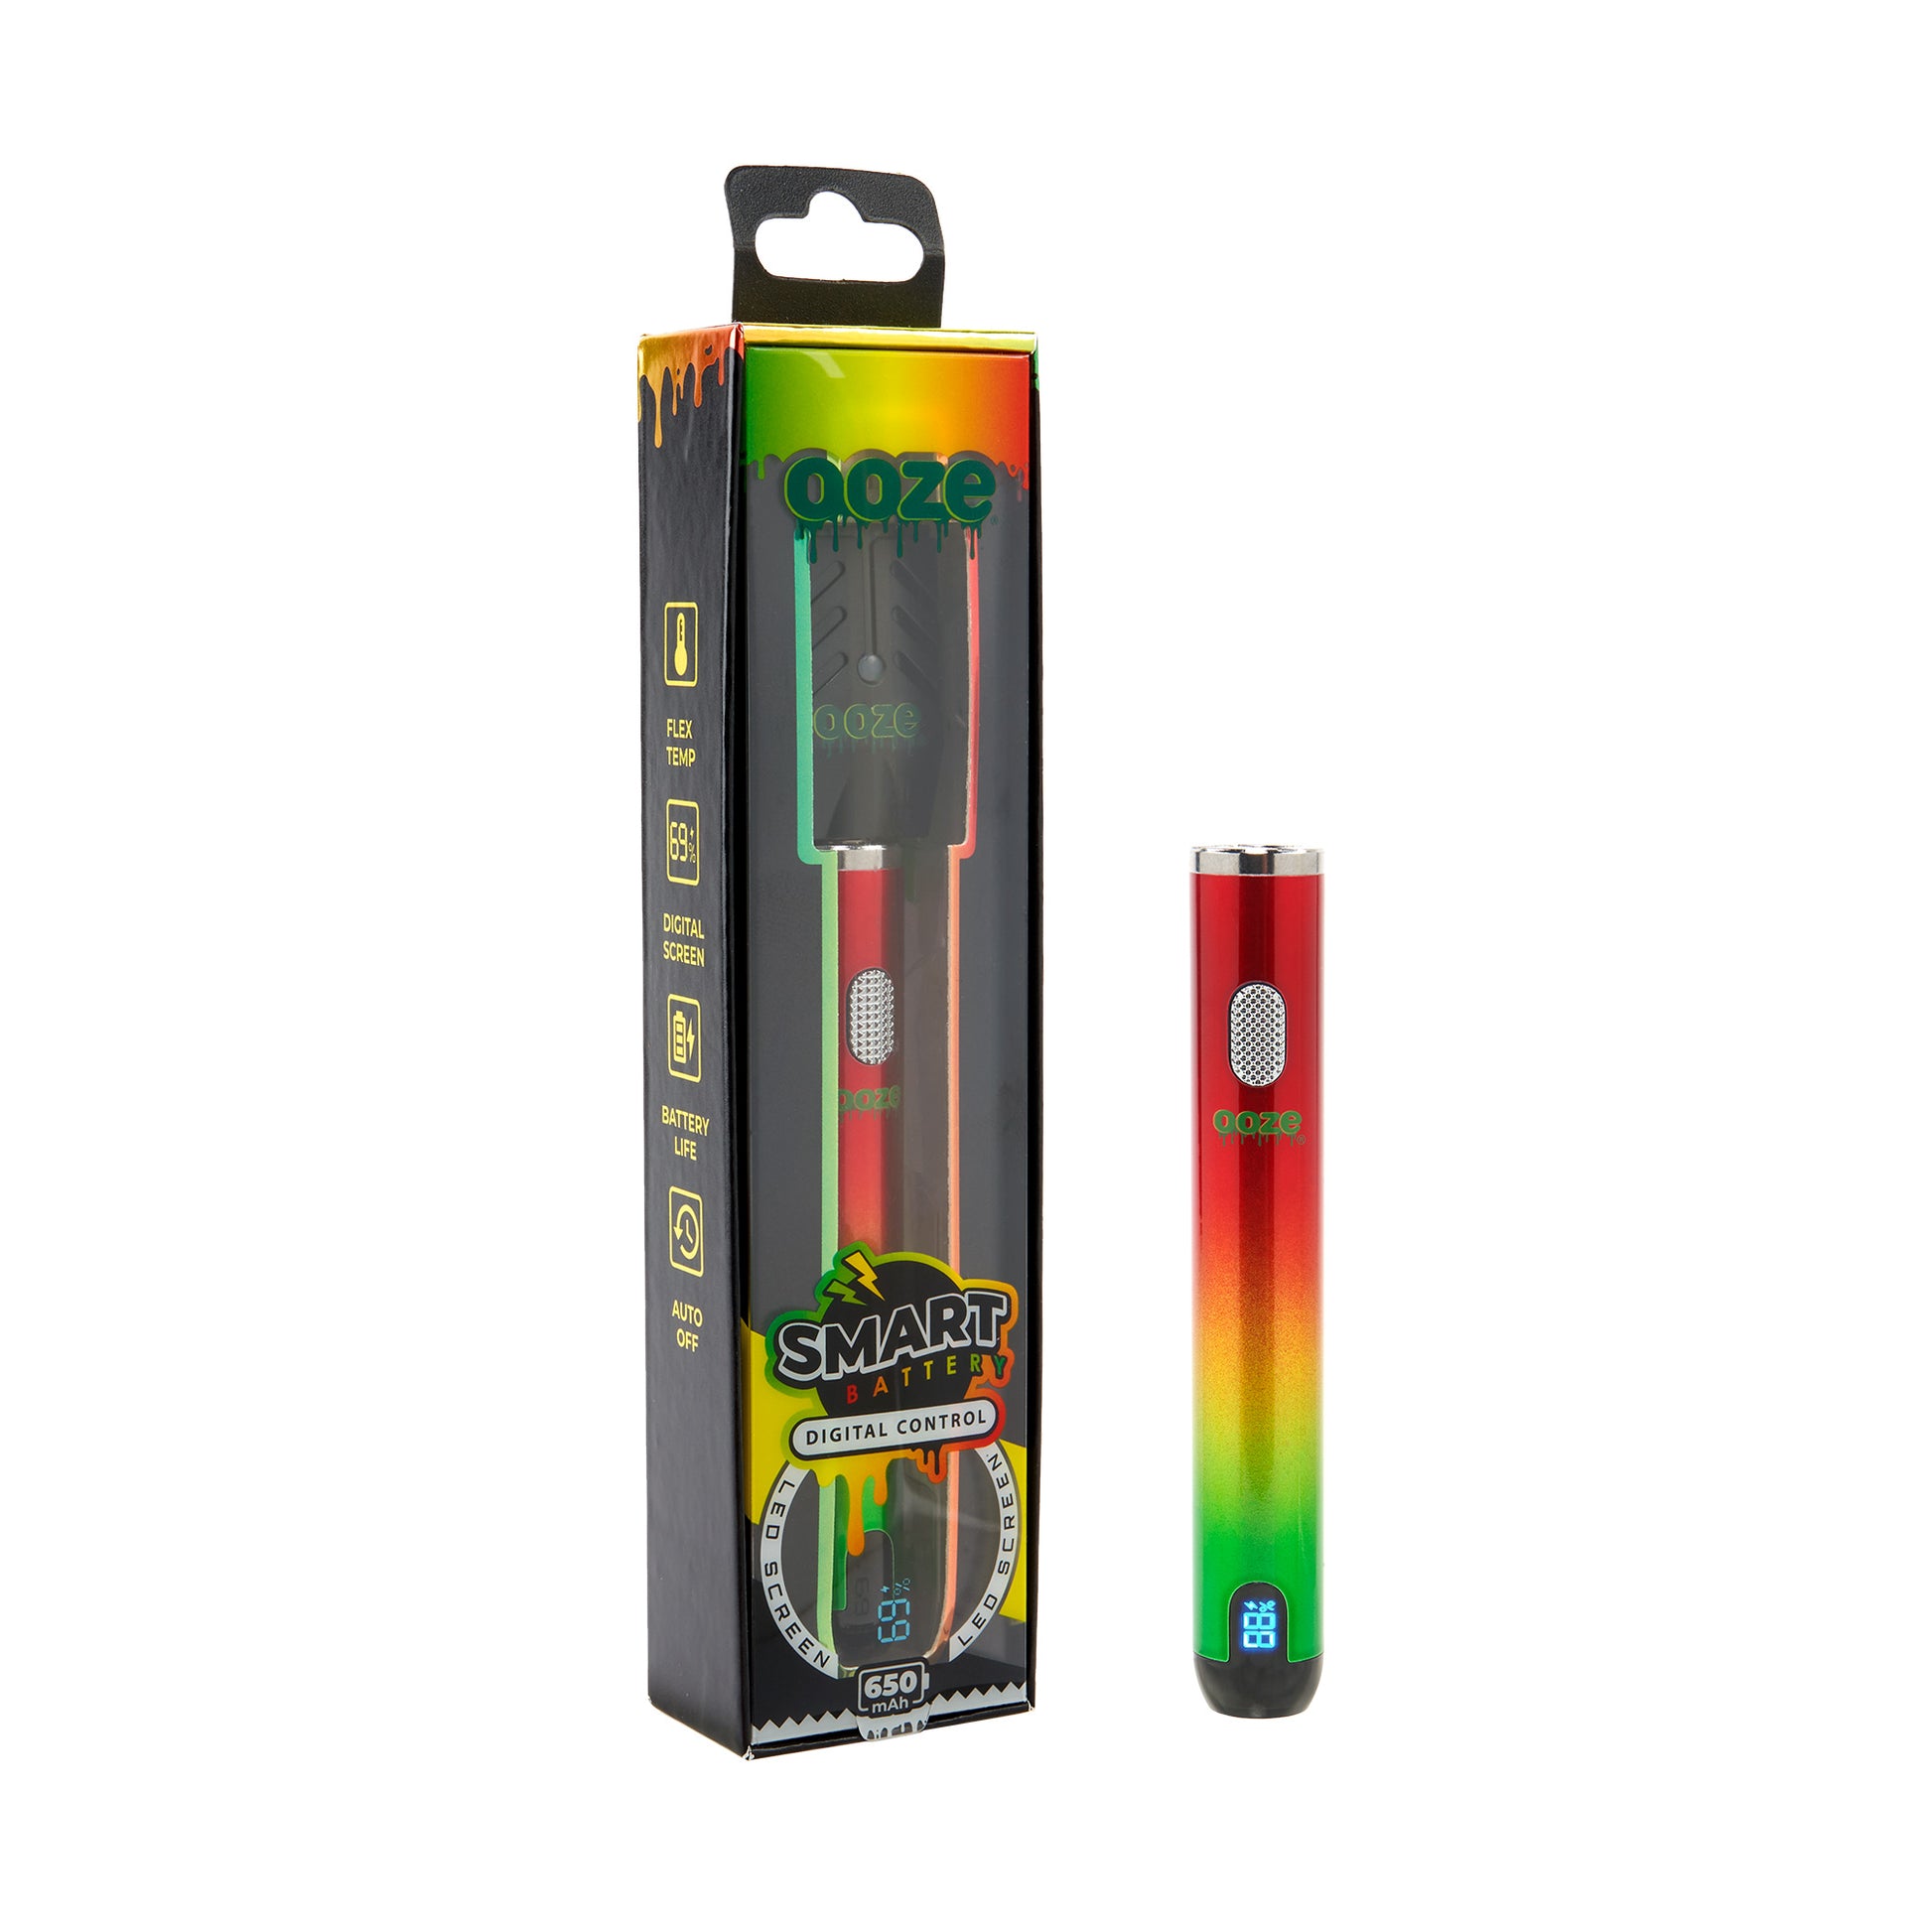 The rasta Ooze Smart Battery is upright and turned on next to the package